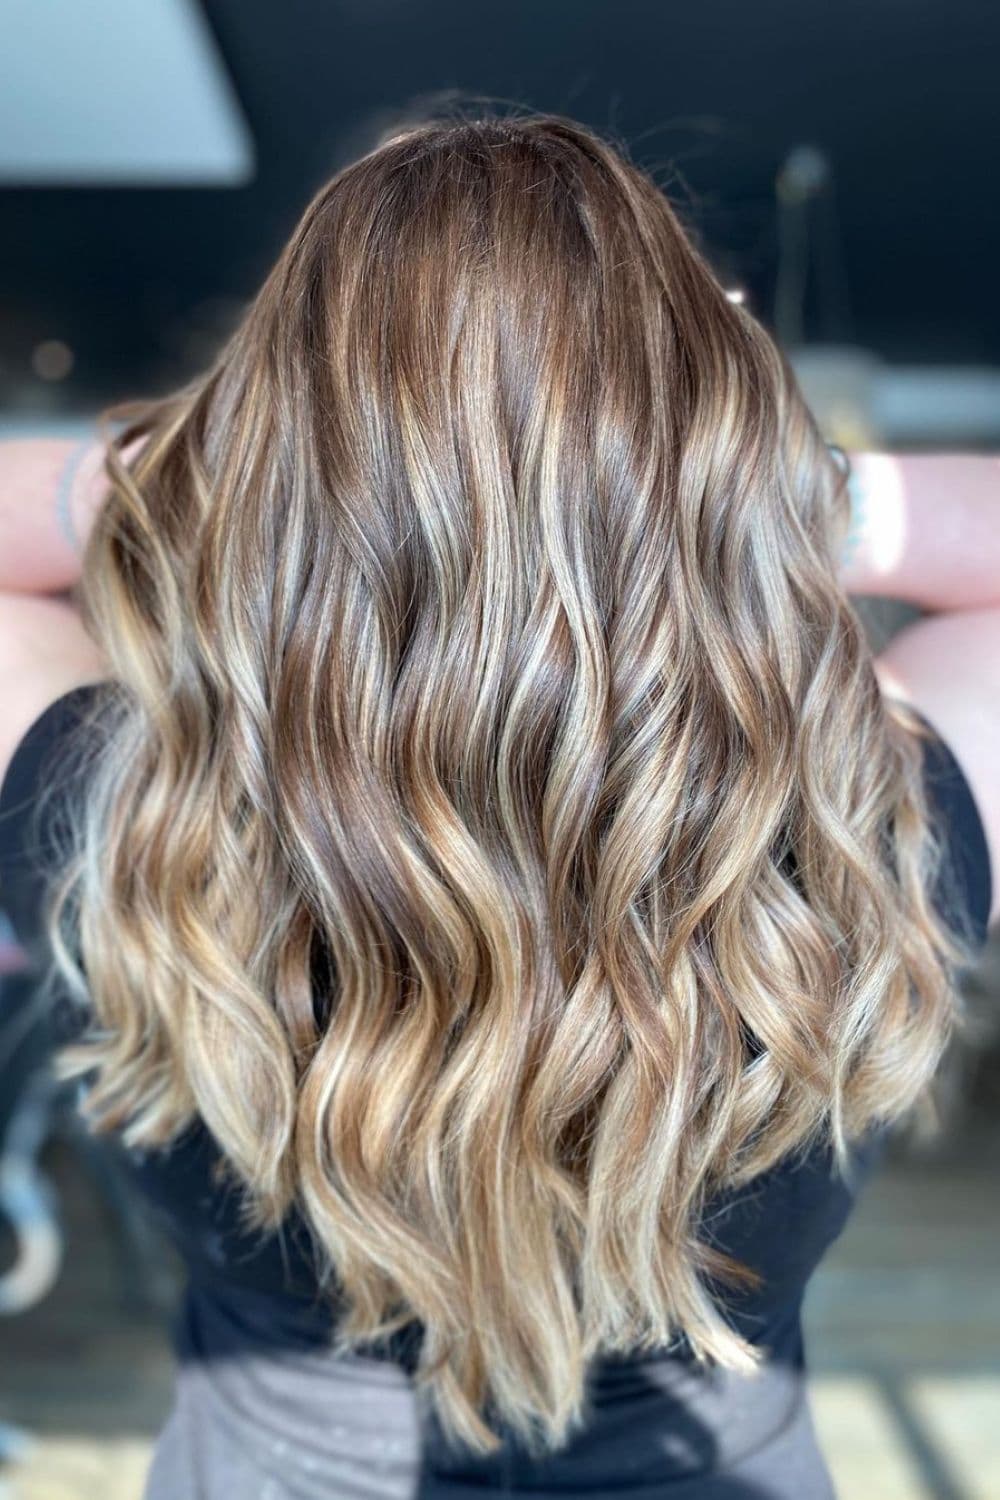 A woman's hair in blonde balayage v-cut with layers.